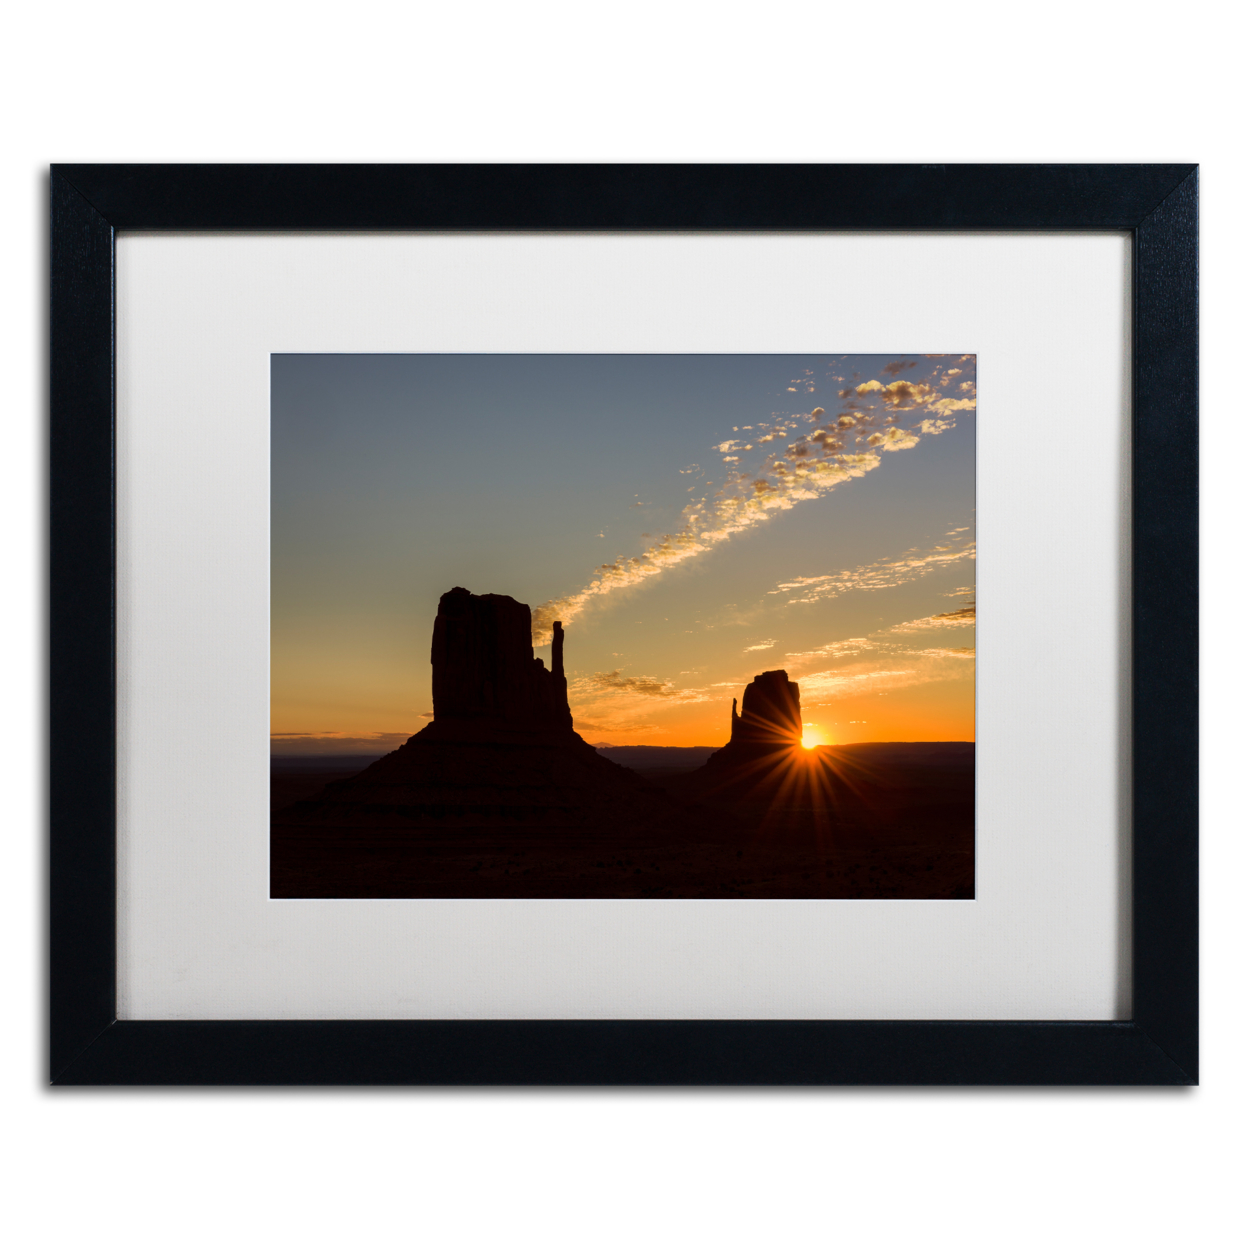 Michael Blanchette Photography 'Light On Mittens' Black Wooden Framed Art 18 X 22 Inches